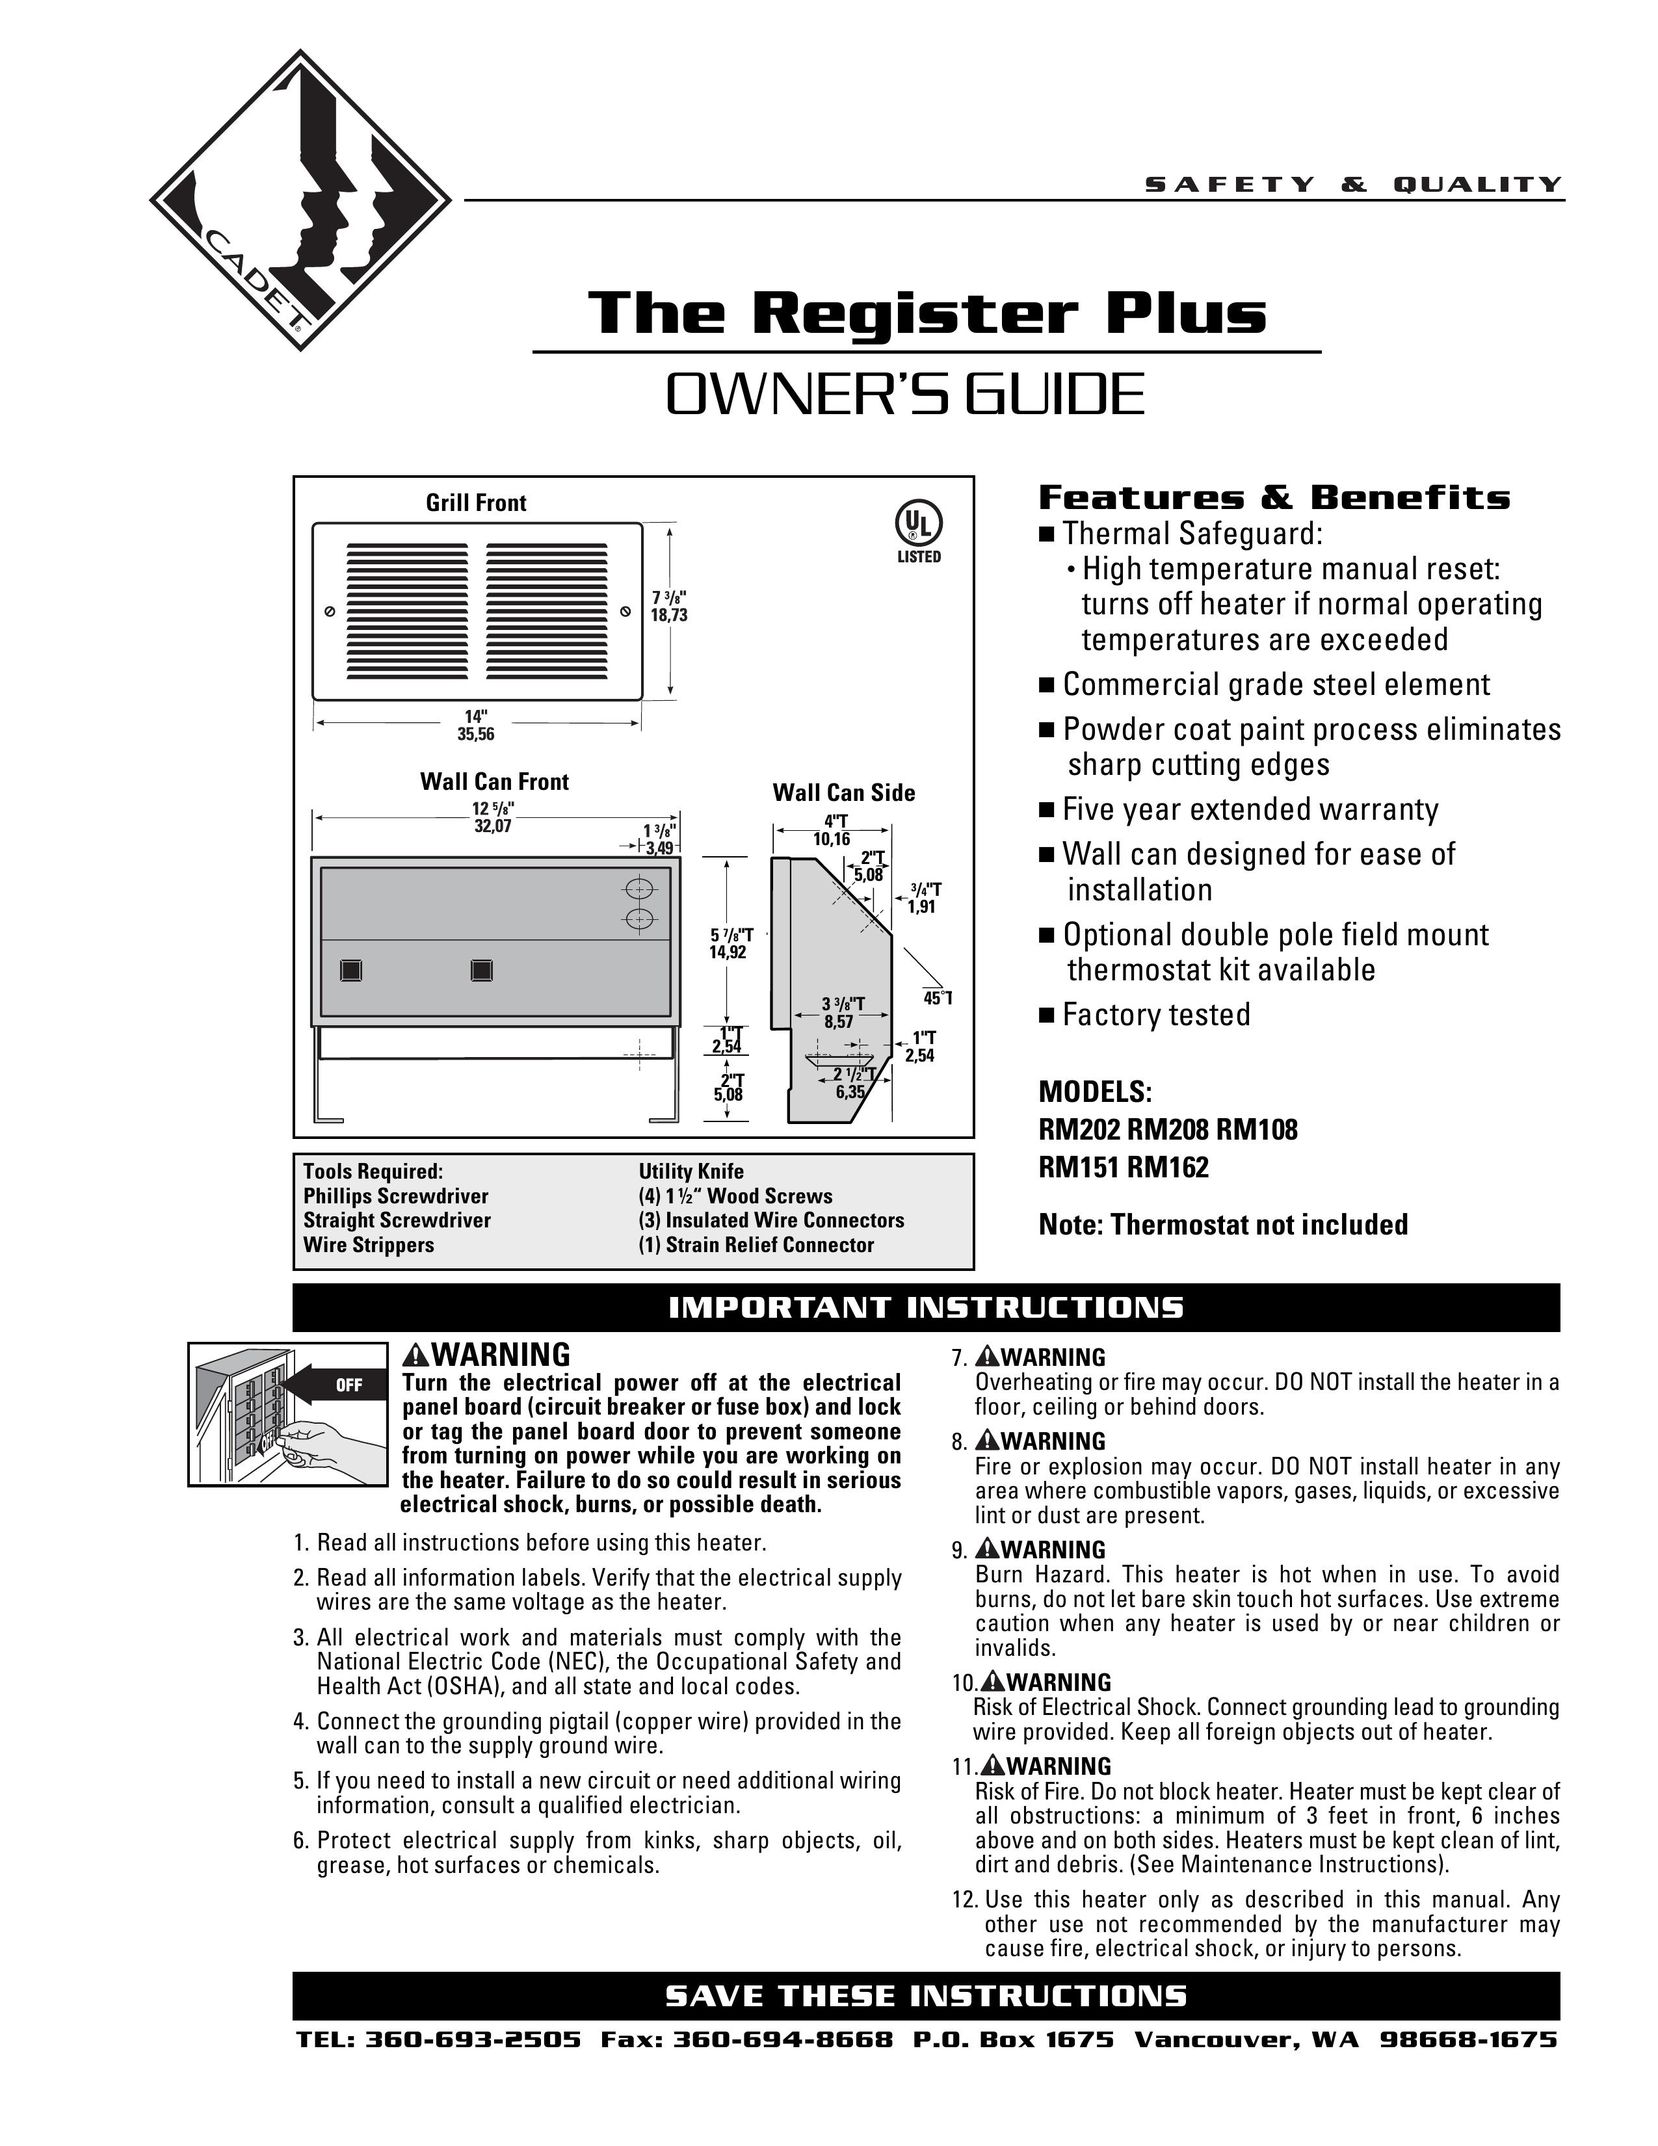 Cadet RM151 Electric Heater User Manual